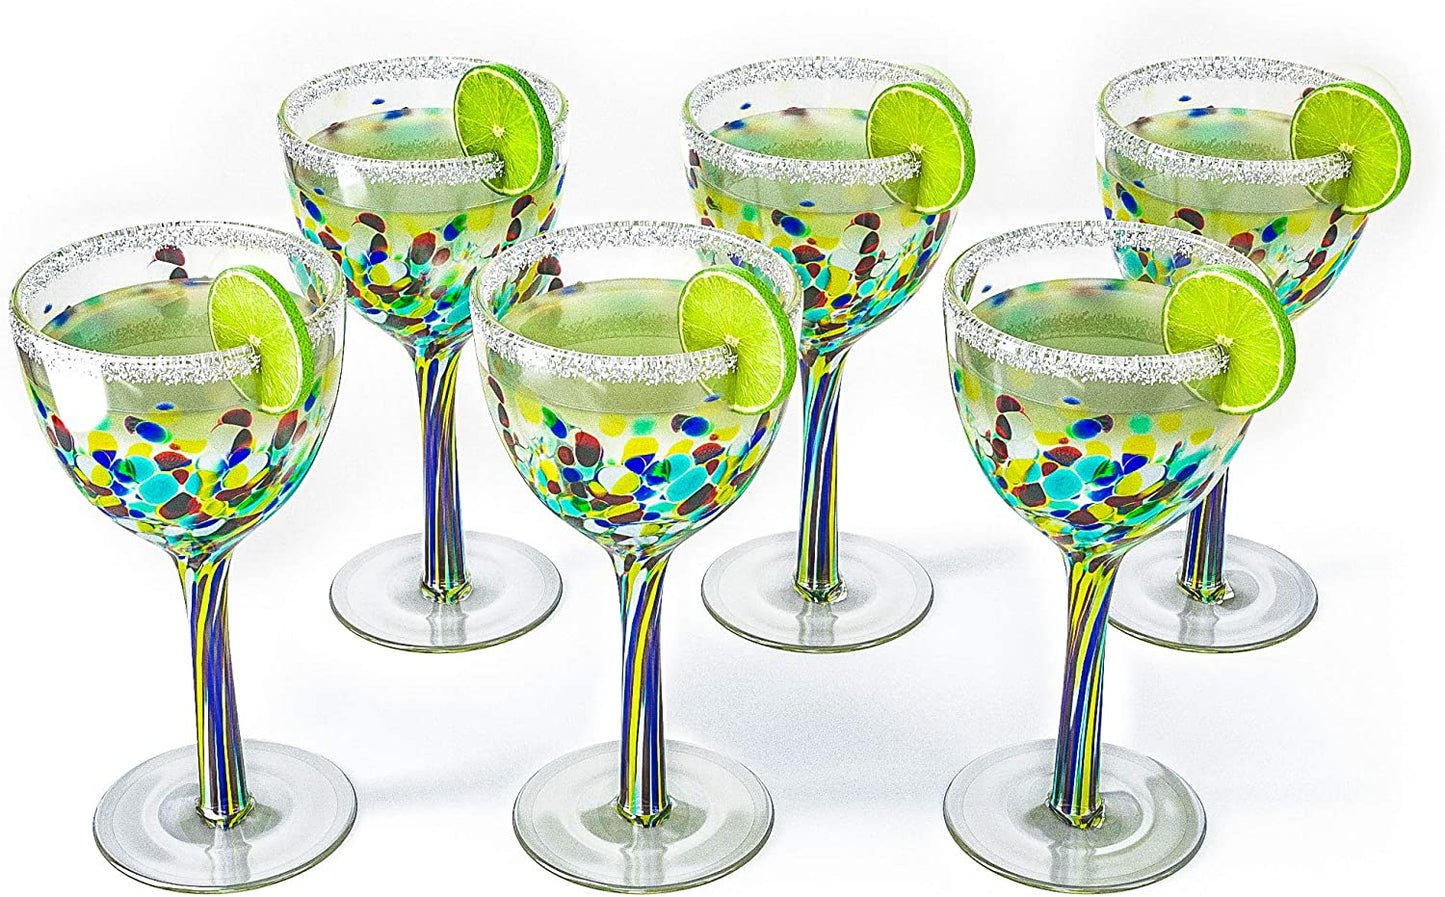 The Wine Savant - Mexican Wine Glasses Set of 6 - Pebble Confetti Mexican Luxury Hand Blown Wine and Water Glasses - 8 oz